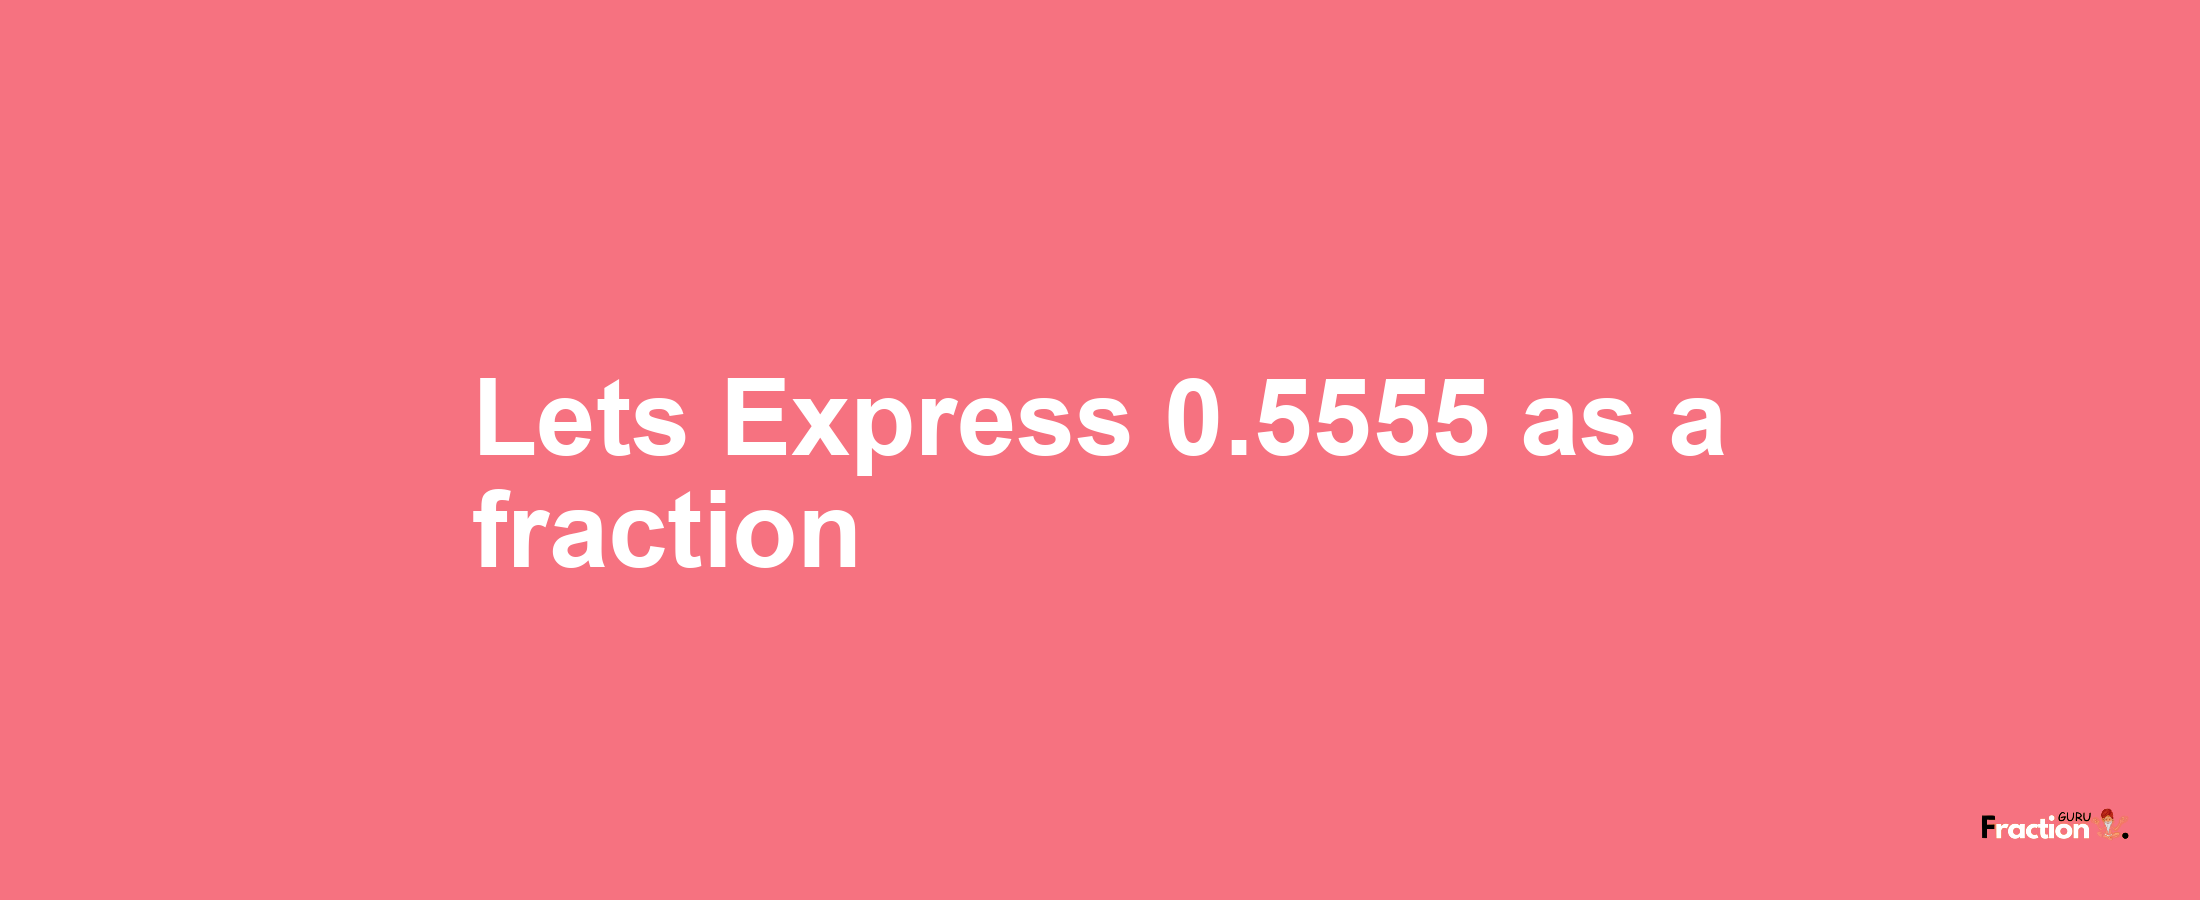 Lets Express 0.5555 as afraction